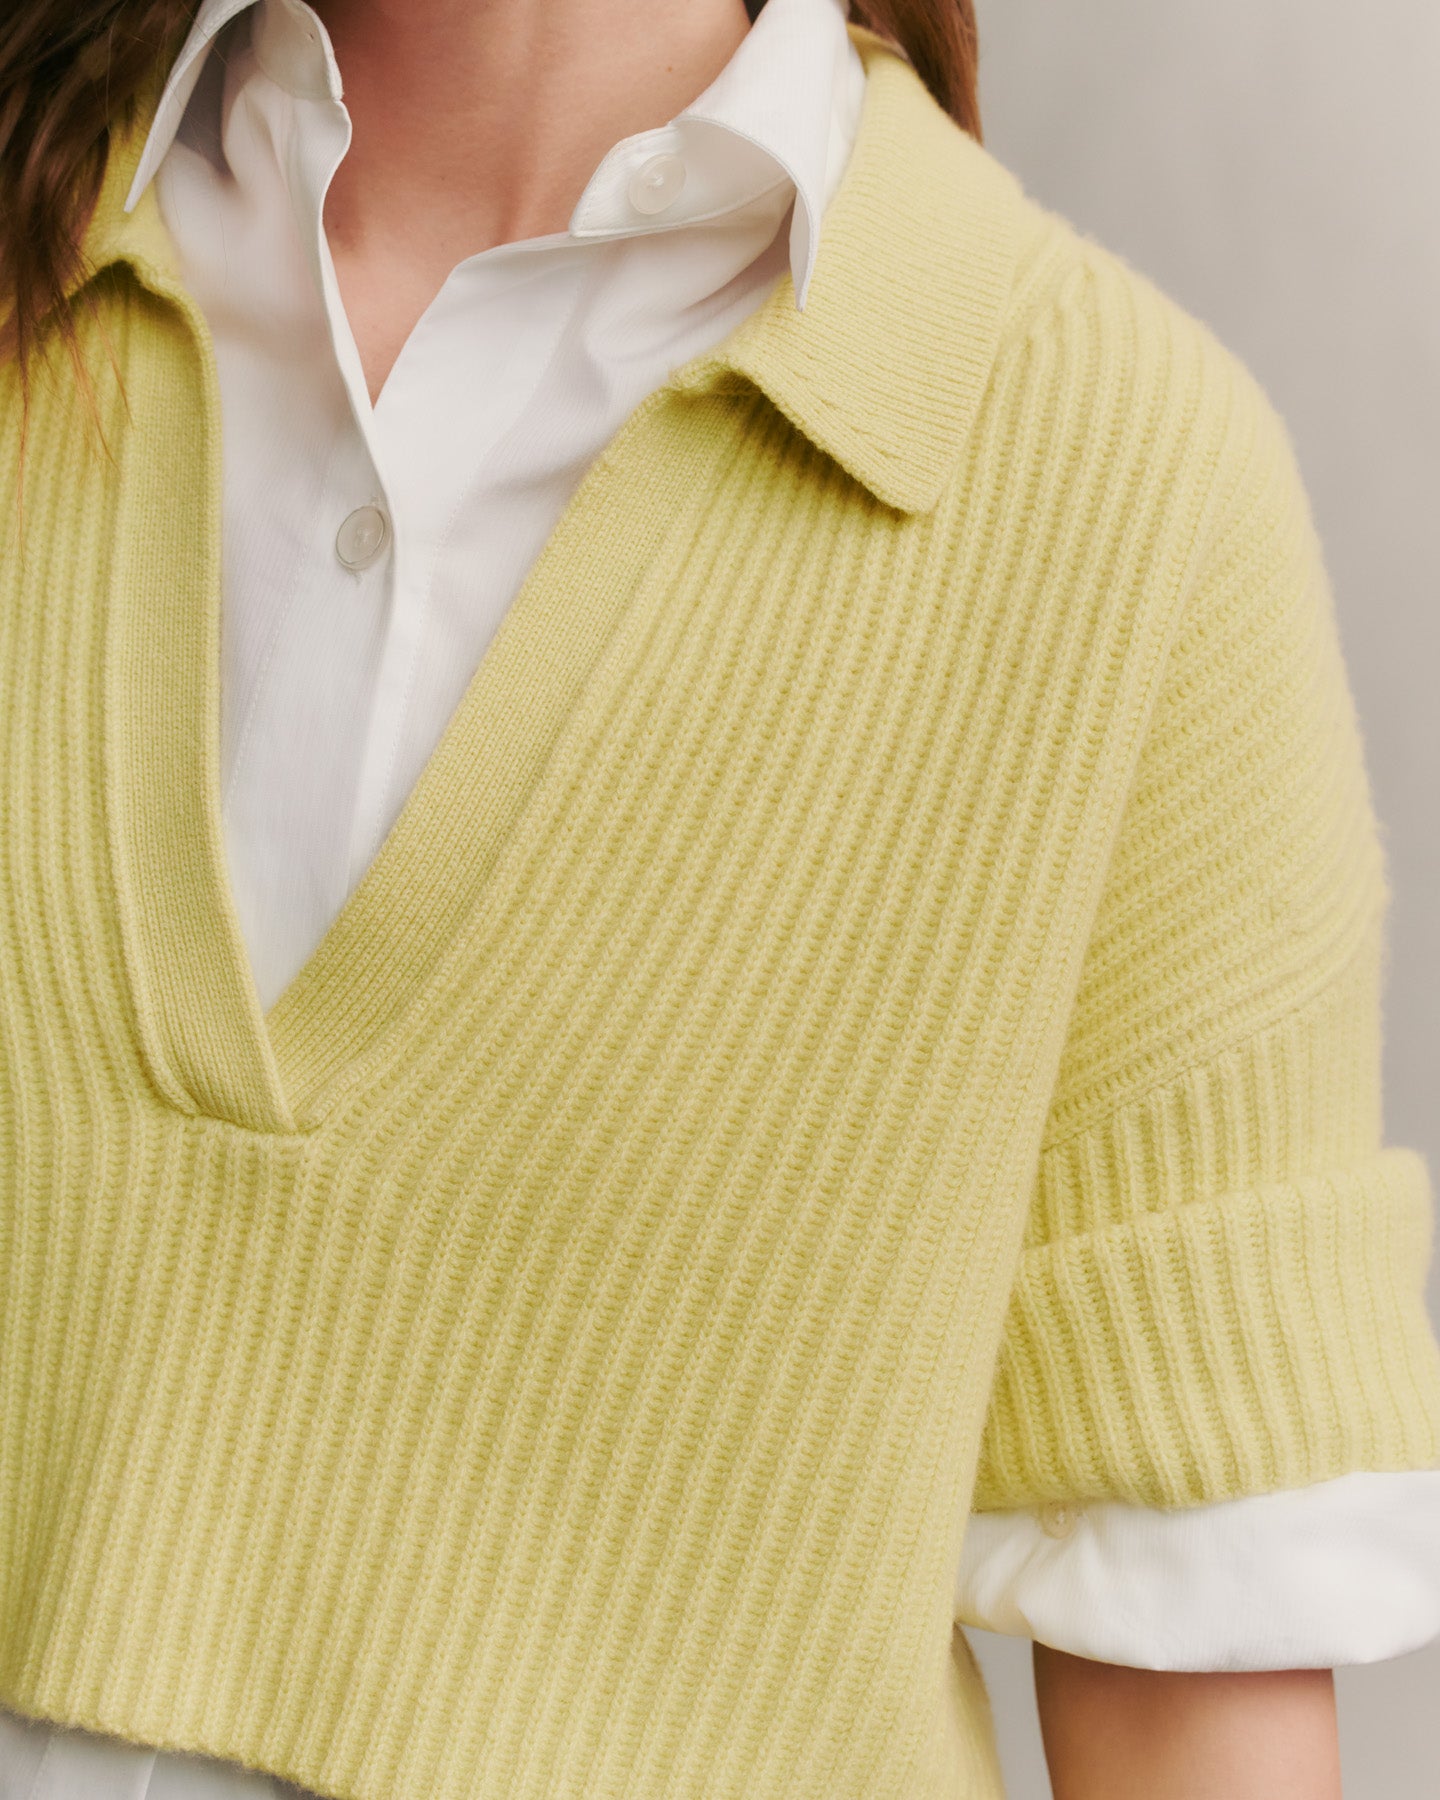 TWP Charlock Tallulah Sweater in Cashmere view 3